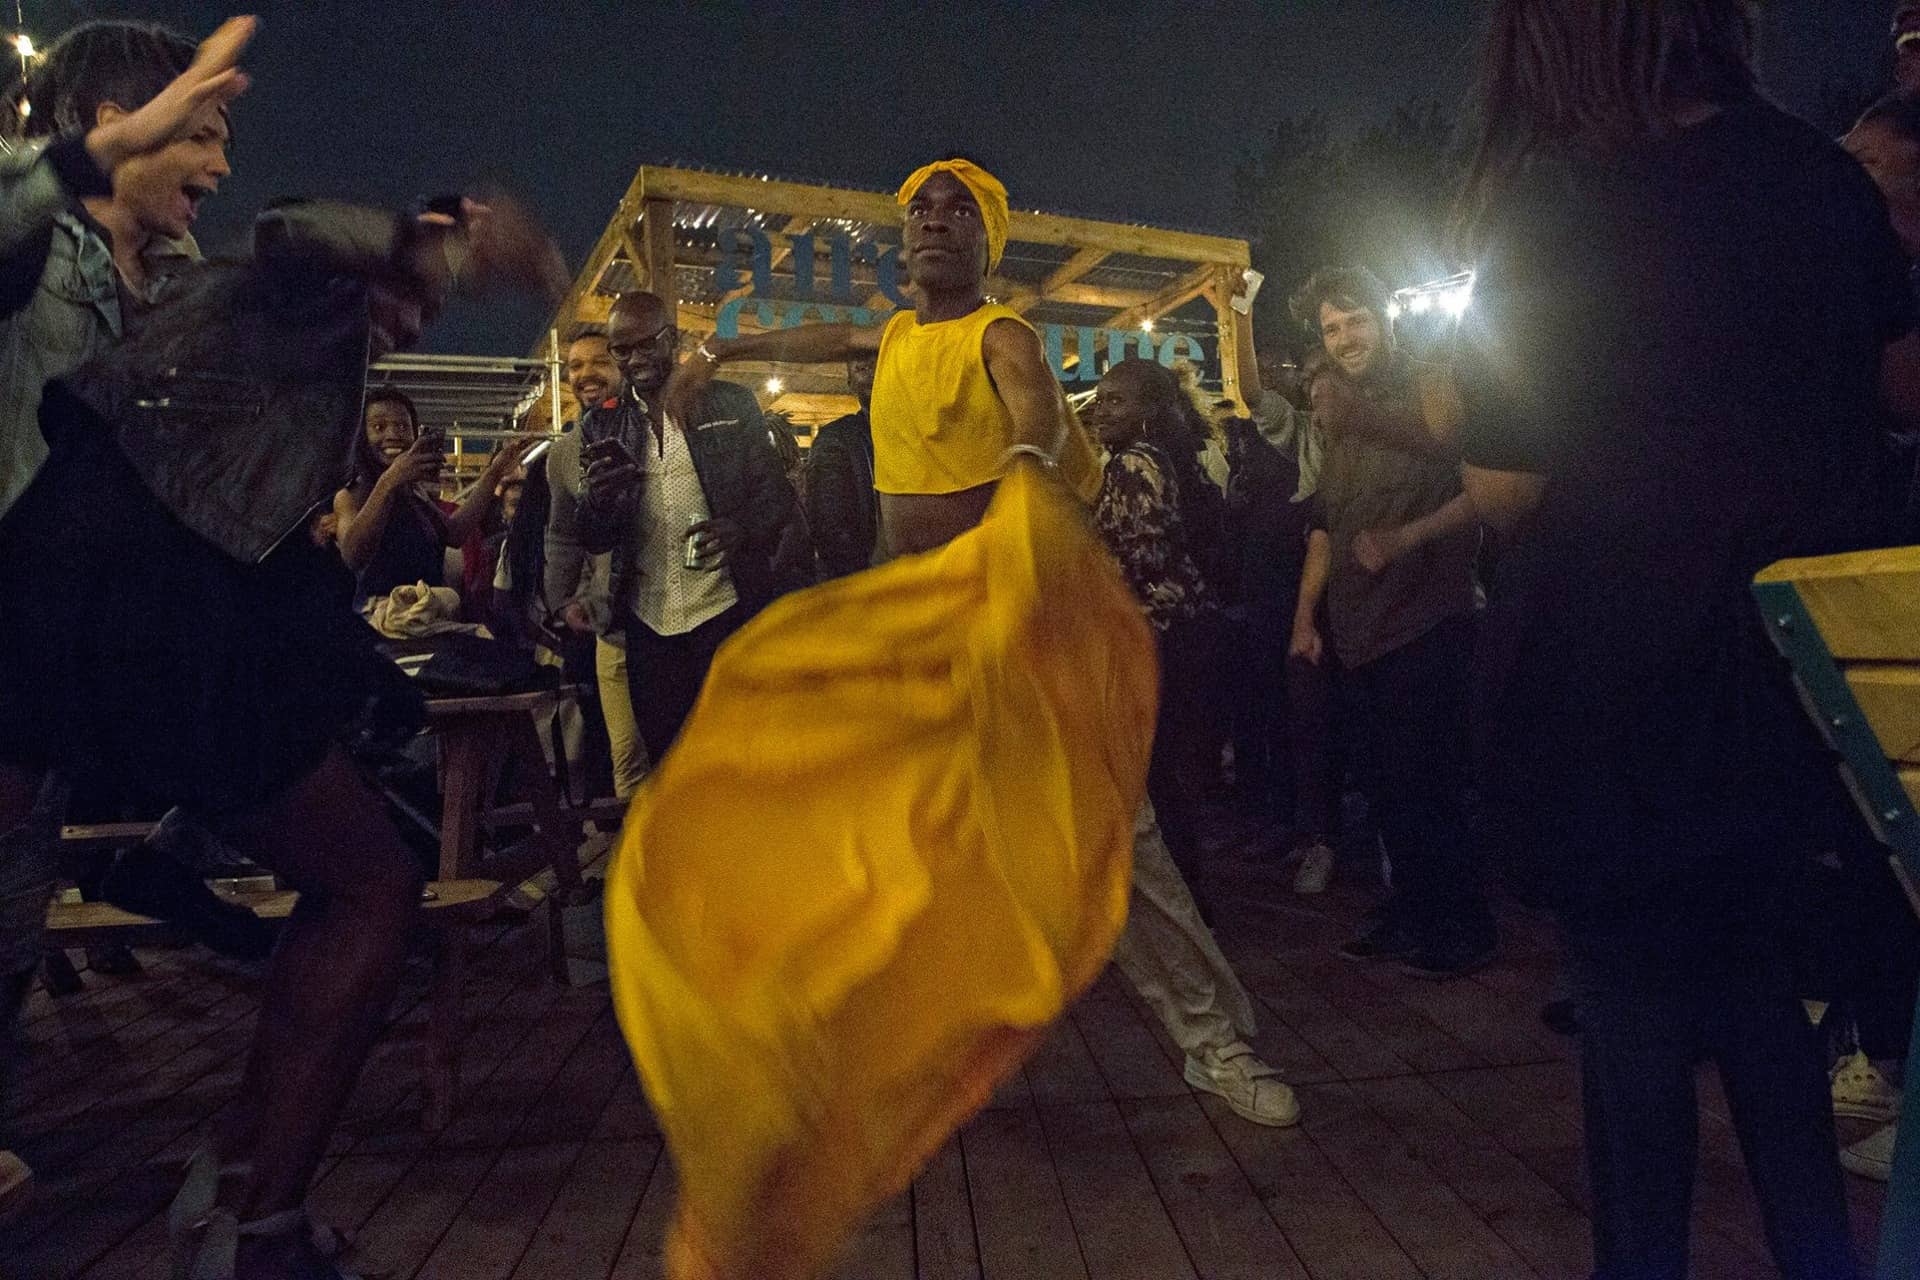 Elegant person in yellow clothes dancing at Cultures event